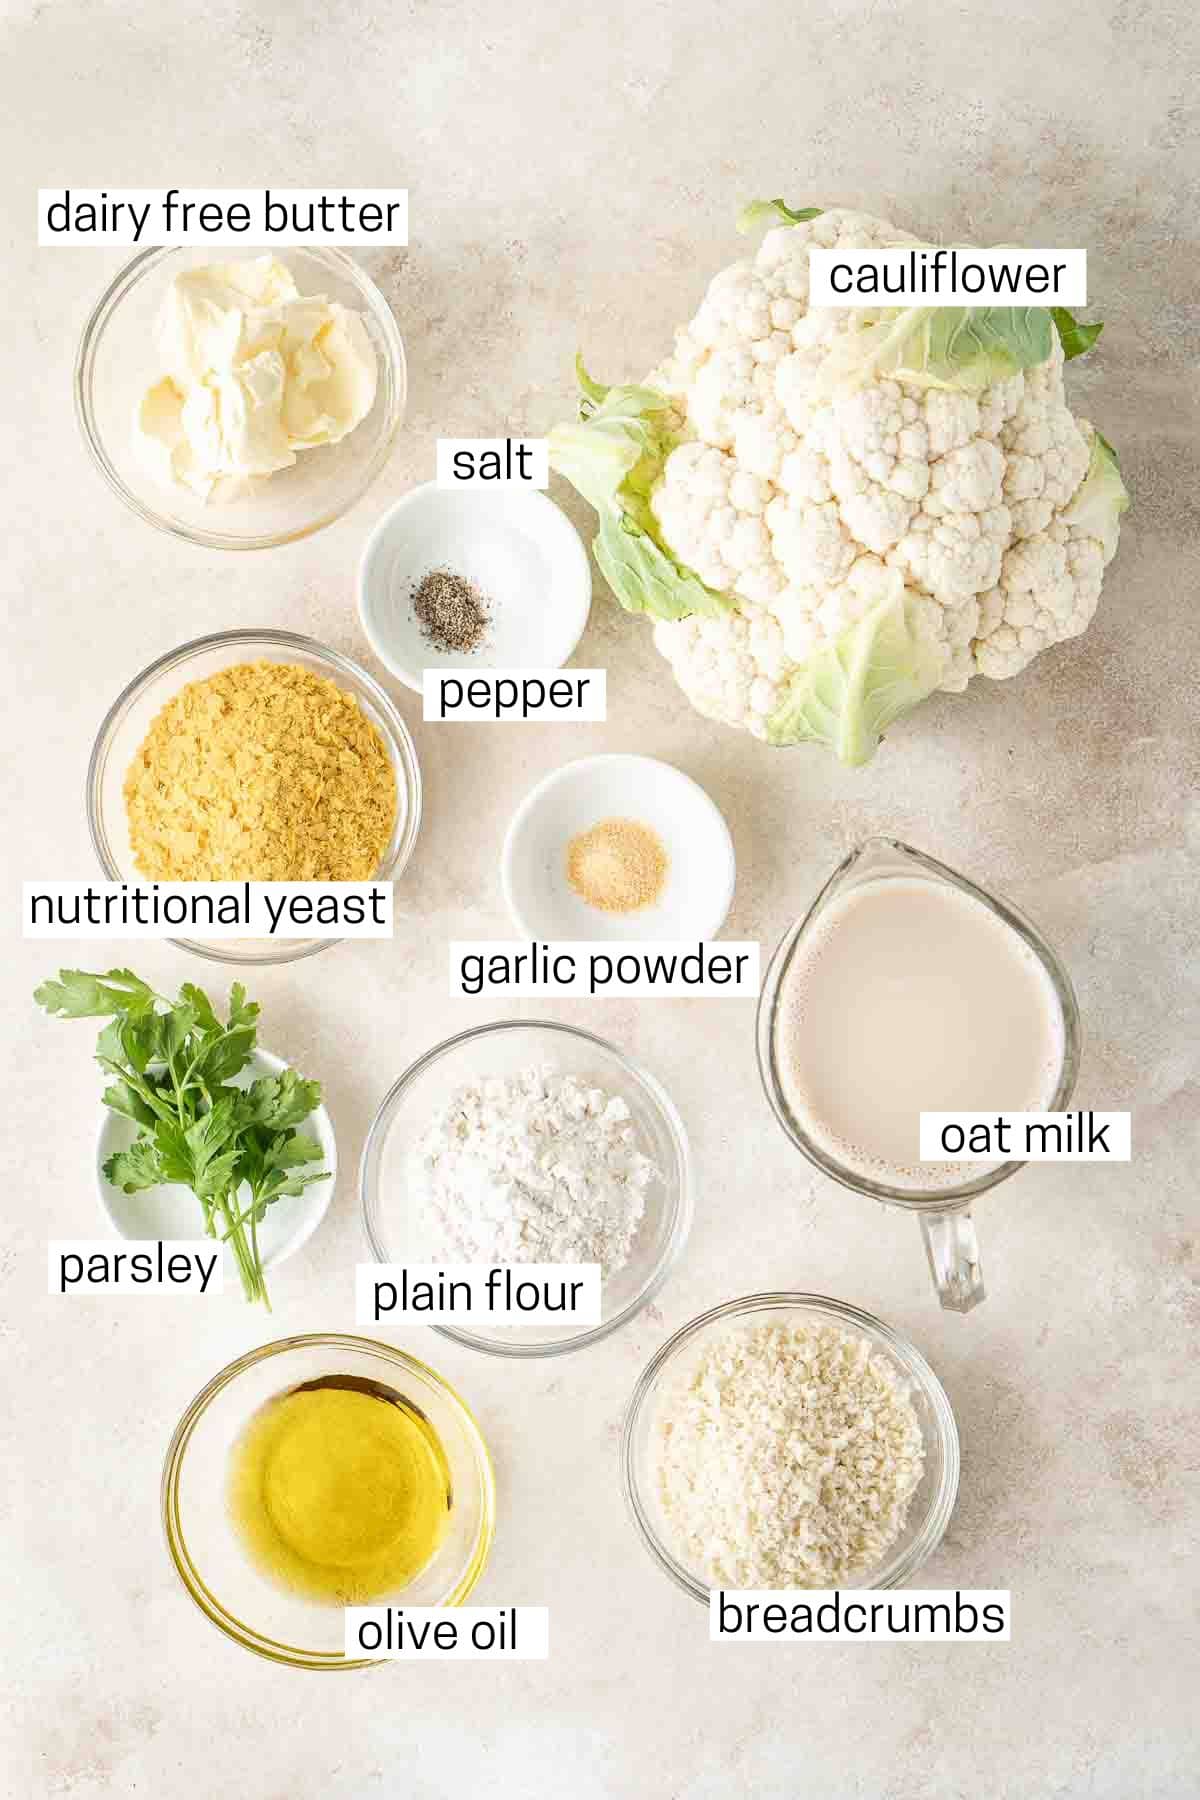 All ingredients needed for vegan cauliflower bake laid out in small bowls.